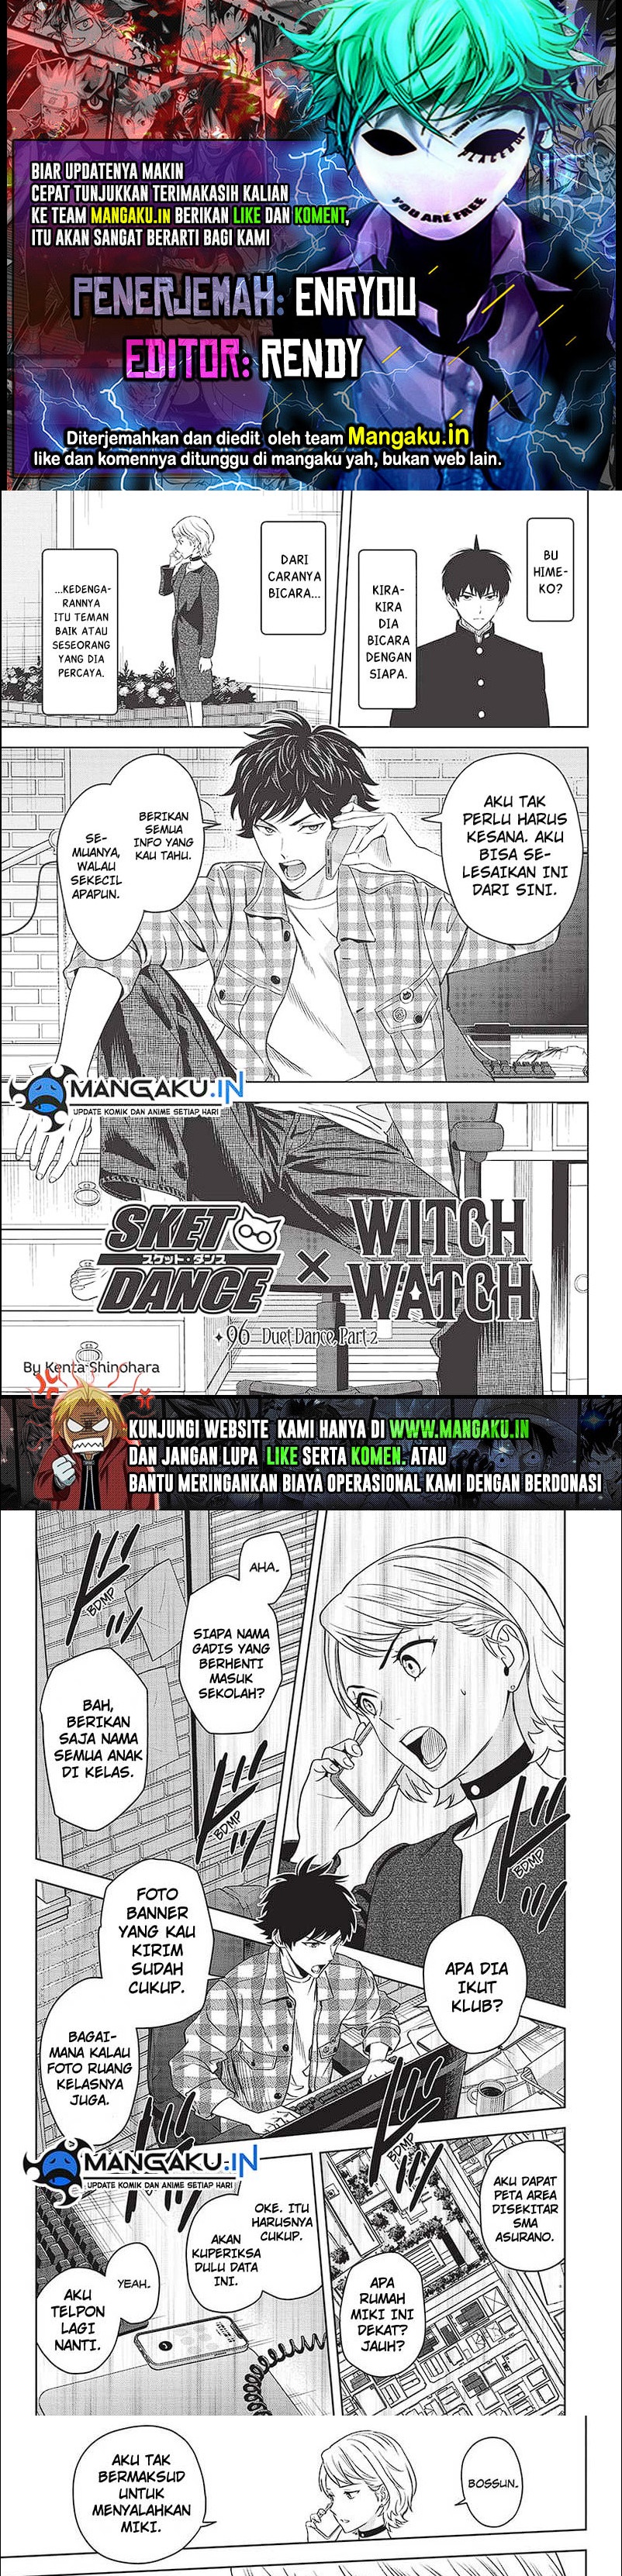 Witch Watch Chapter 96 1